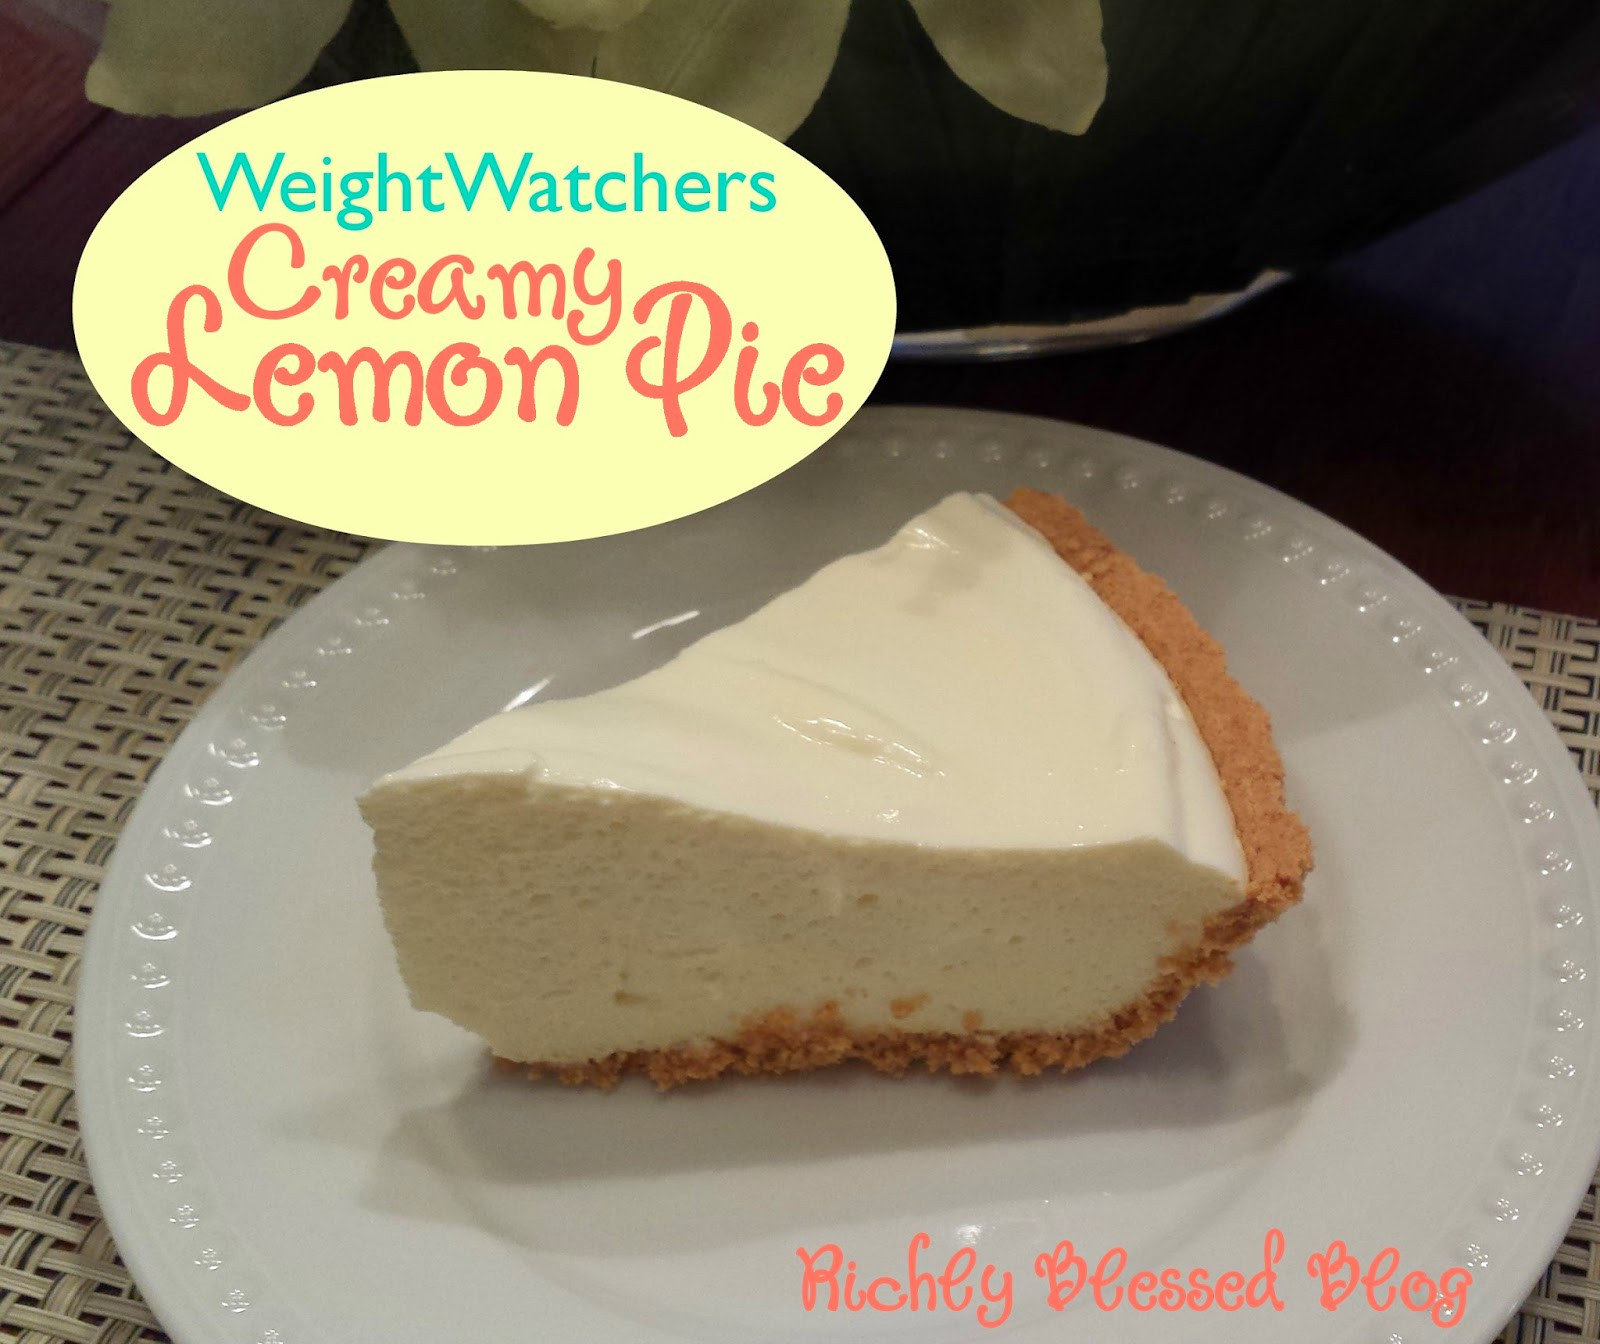 Weight Watchers Pie Recipes
 Richly Blessed Creamy Lemon Pie Weight Watchers Recipe